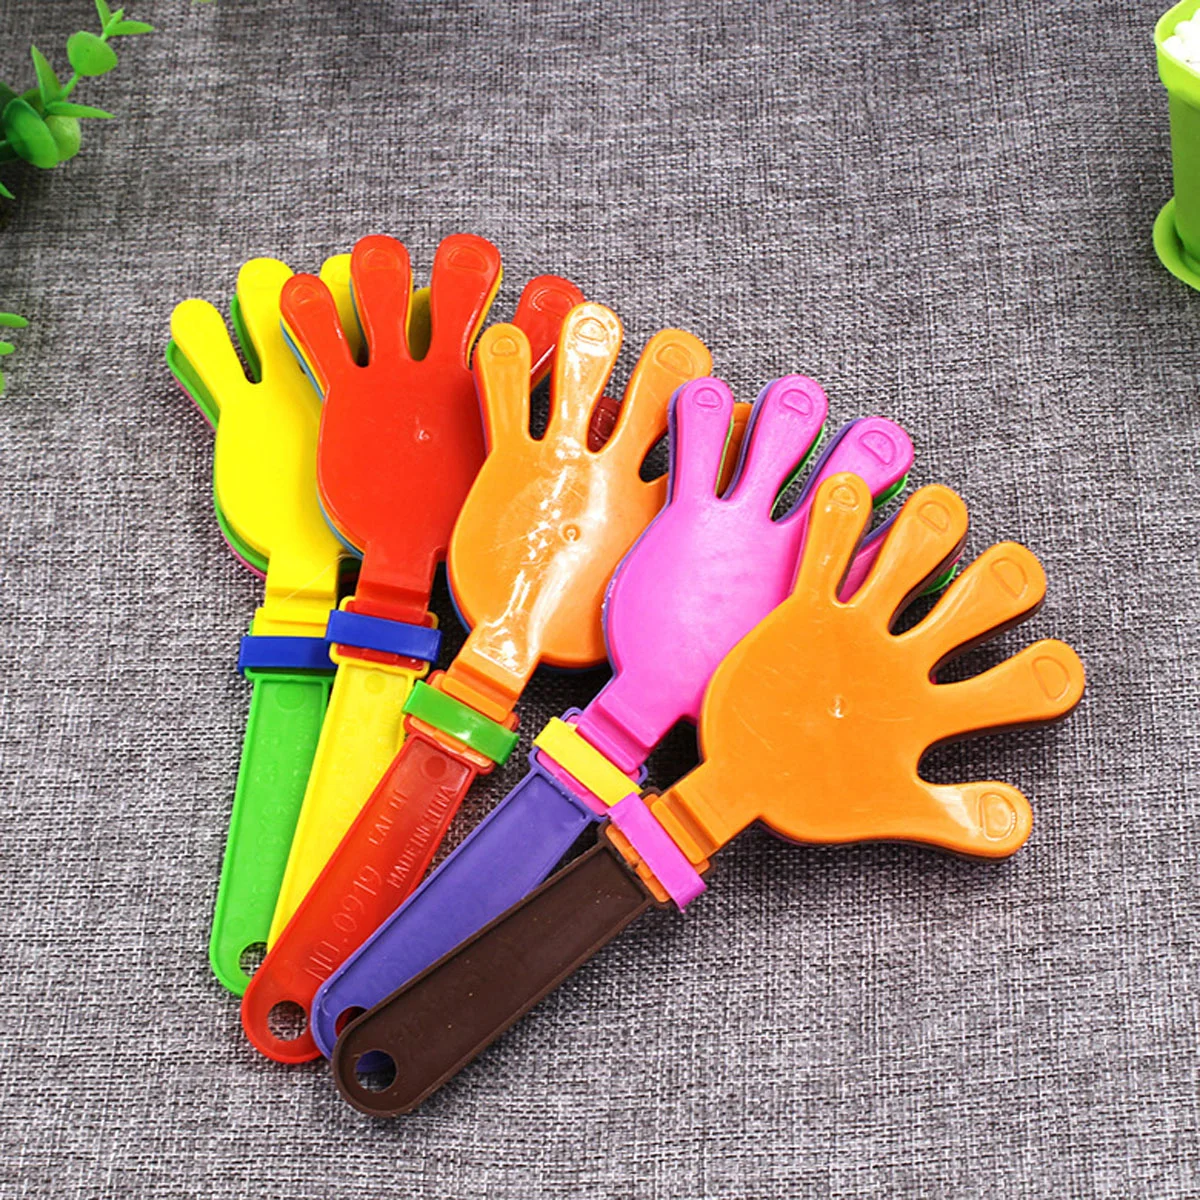 

Noise Clappers Makers Handparty Maker Hands Plam Clap Cheer Clapper Clapping Noisemaker Years Applause New Prop Funny Birthday